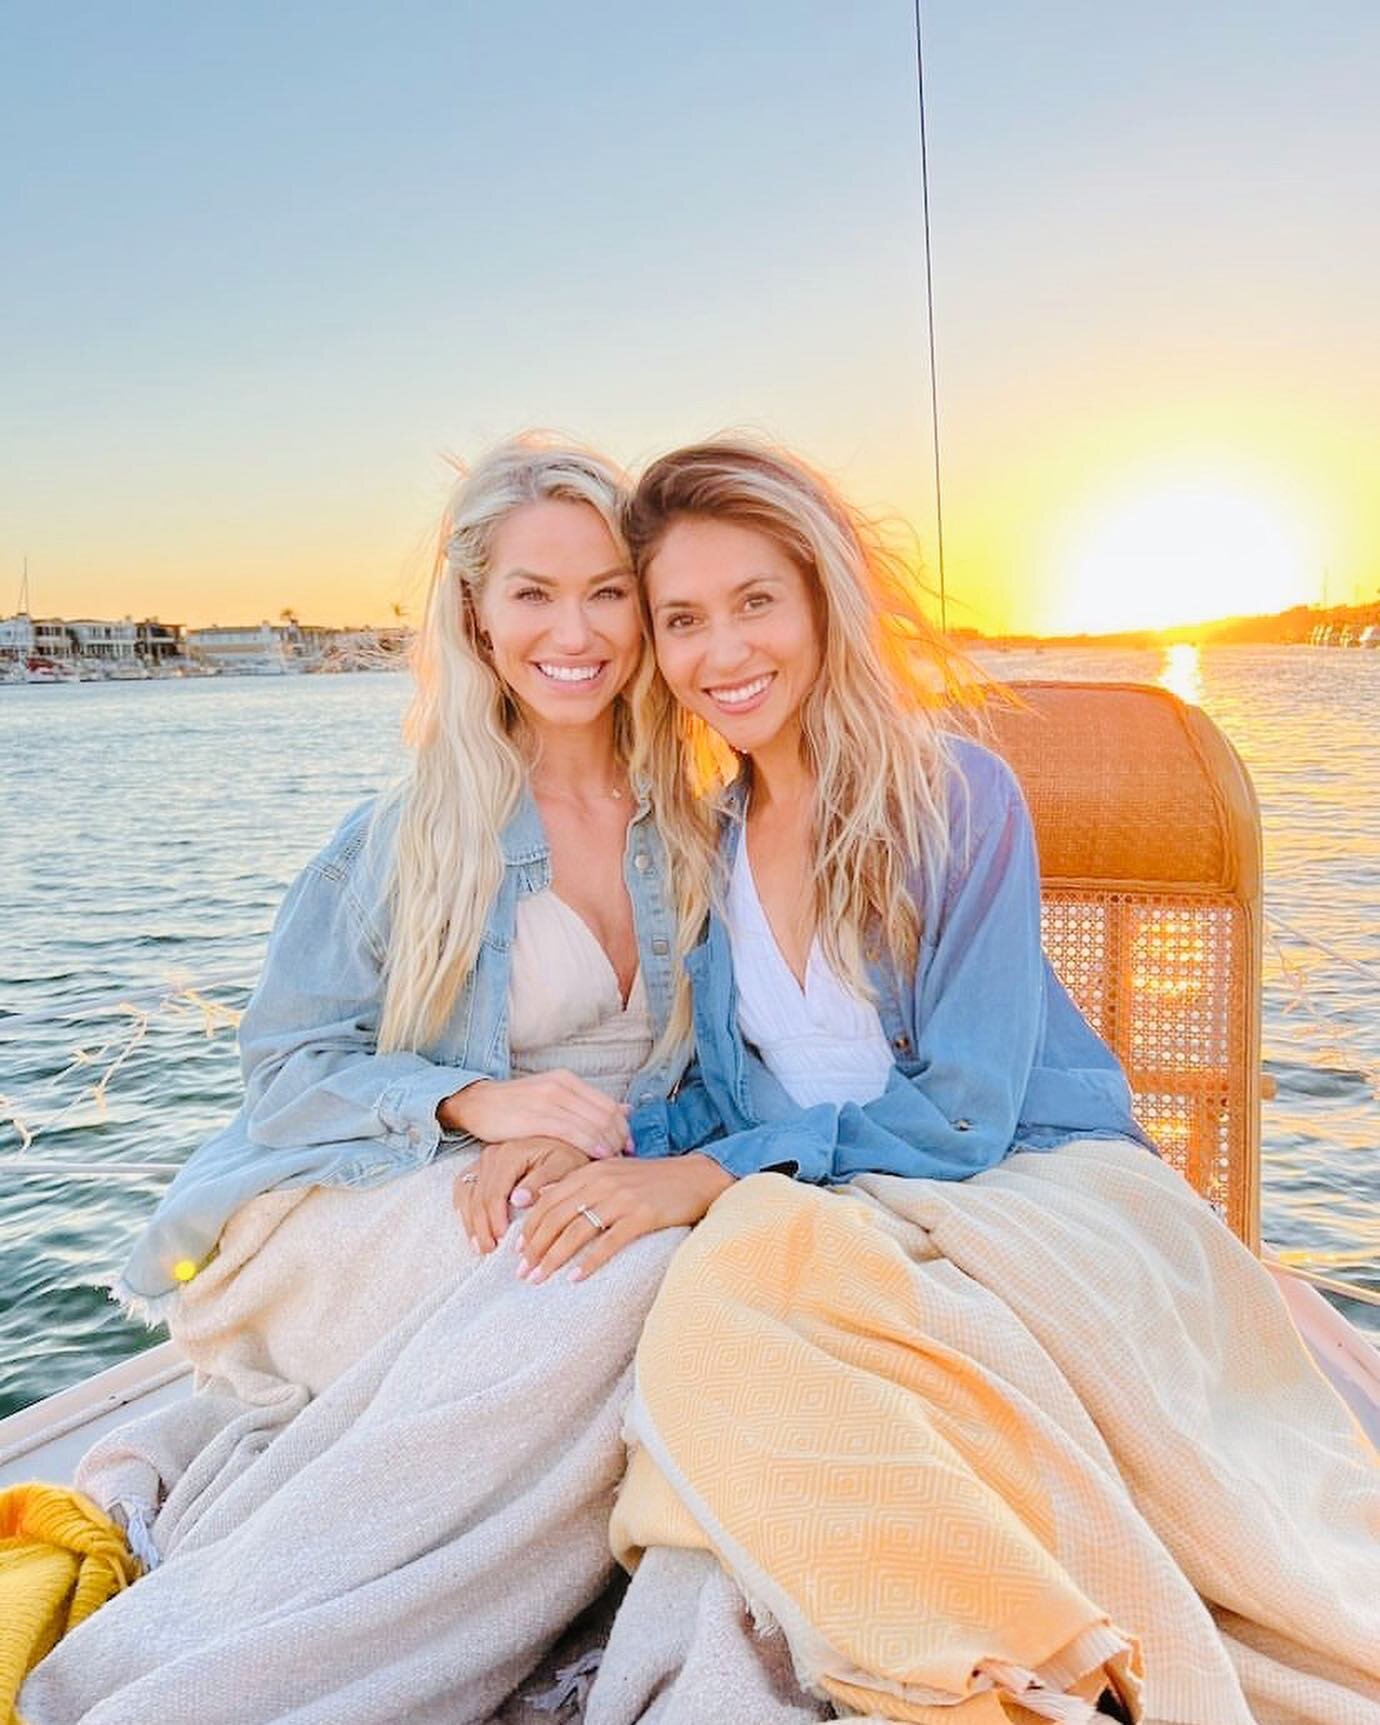 Come spend the summer evenings with your best pals onboard! Book your cruise now at www.theboatpeoplecruise.com #boatcruise #newportbeachca #sunsetcruise #datenightideas #girlsnightout #proposal #datenight #proposalideas #visitnewportbeach